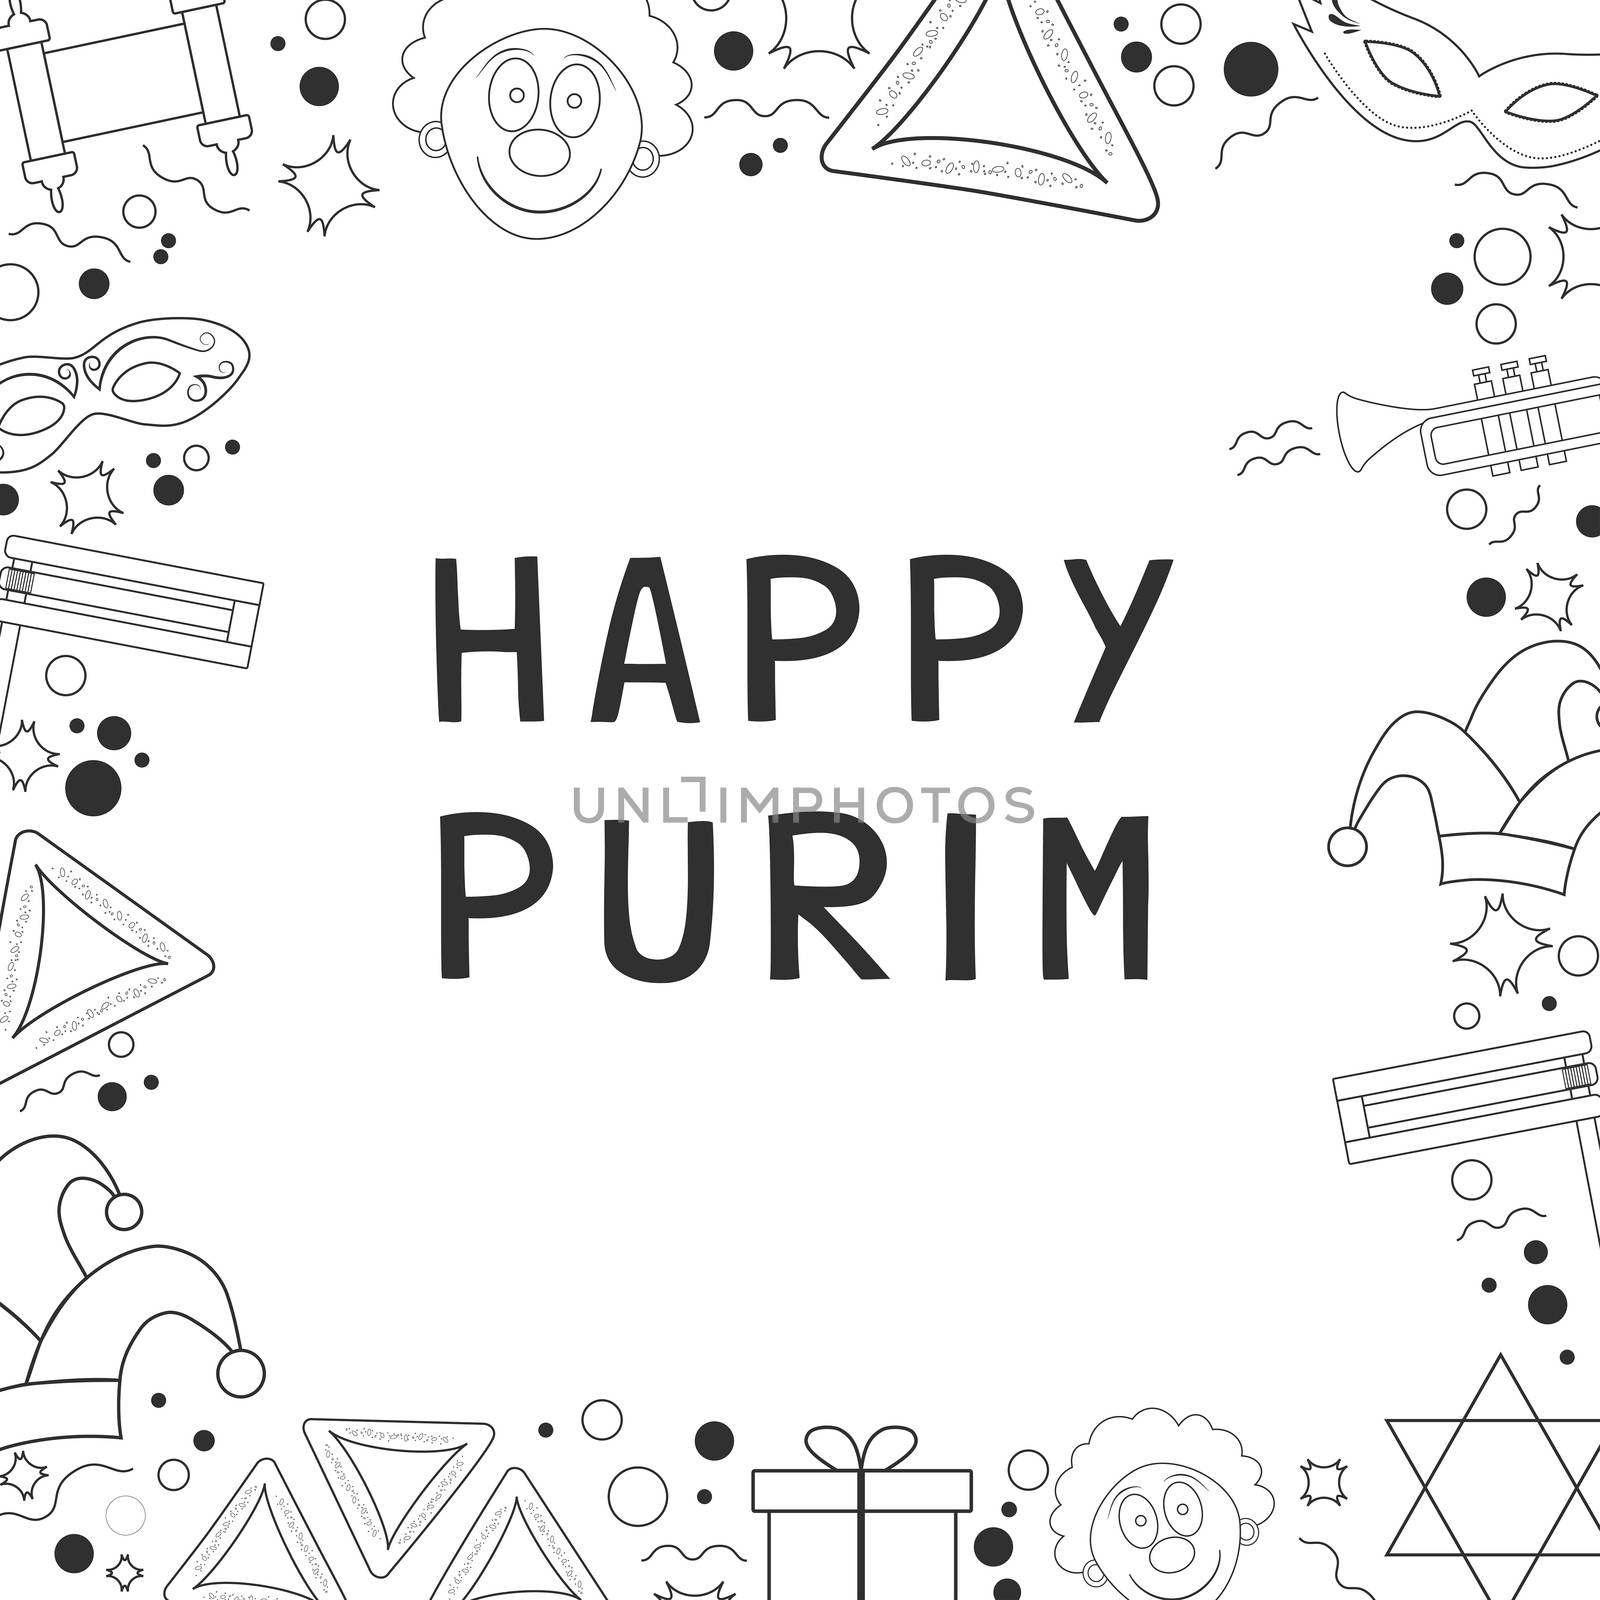 Frame with purim holiday flat design black thin line icons with text in english "Happy Purim". Template with space for text, isolated on background. Vector eps10 illustration.